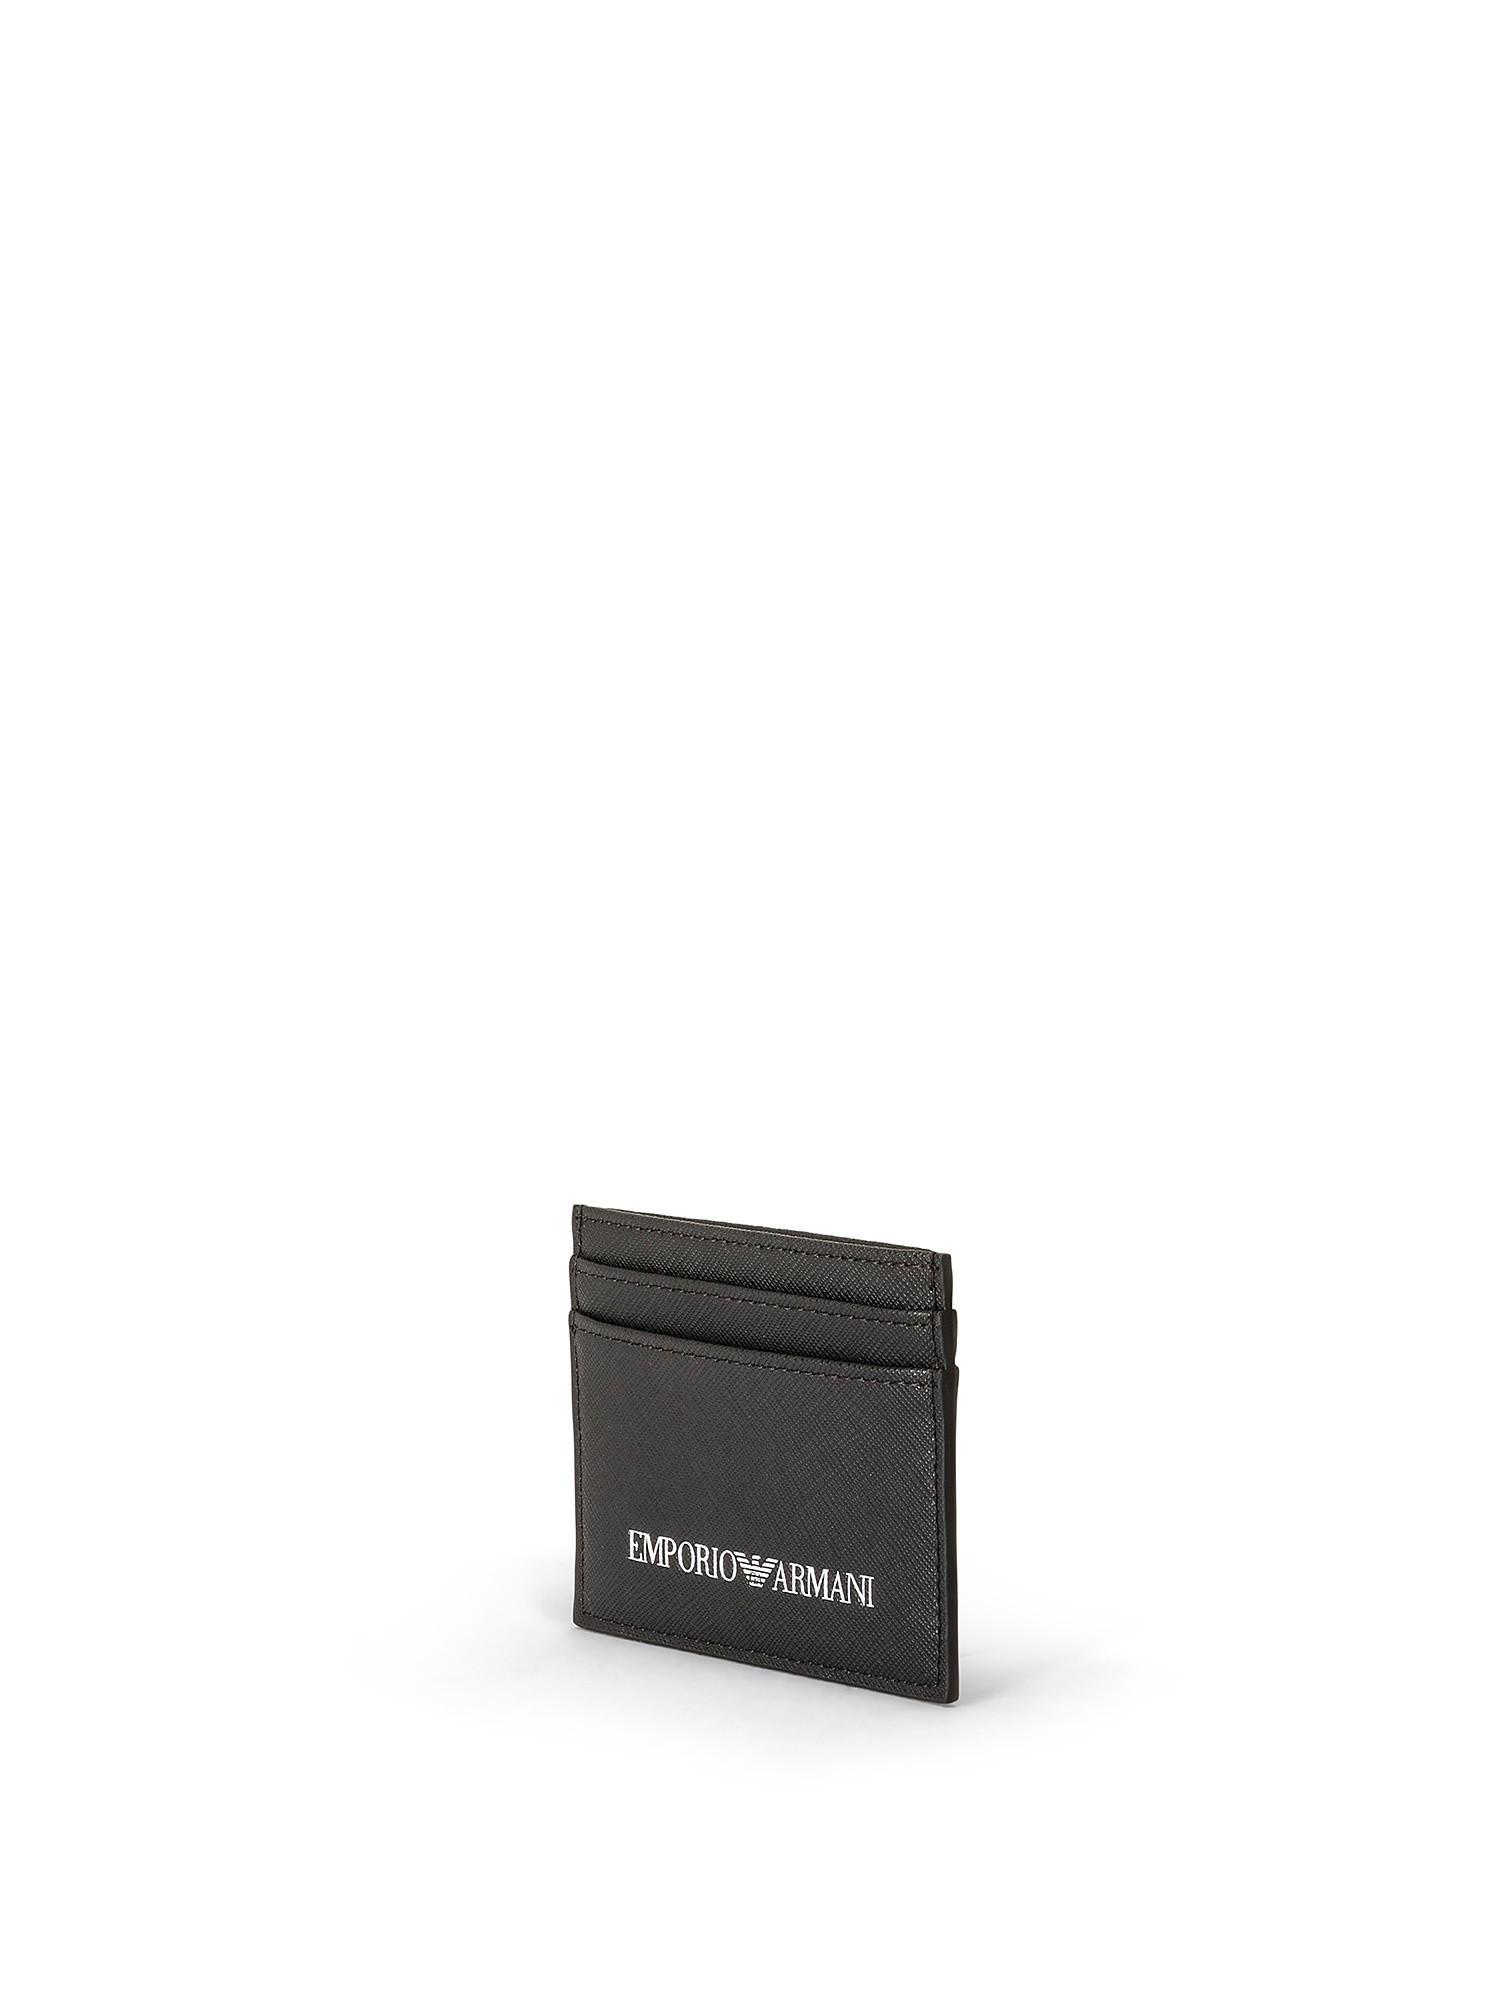 Emporio Armani - Card holder in saffiano print regenerated leather, Black, large image number 1